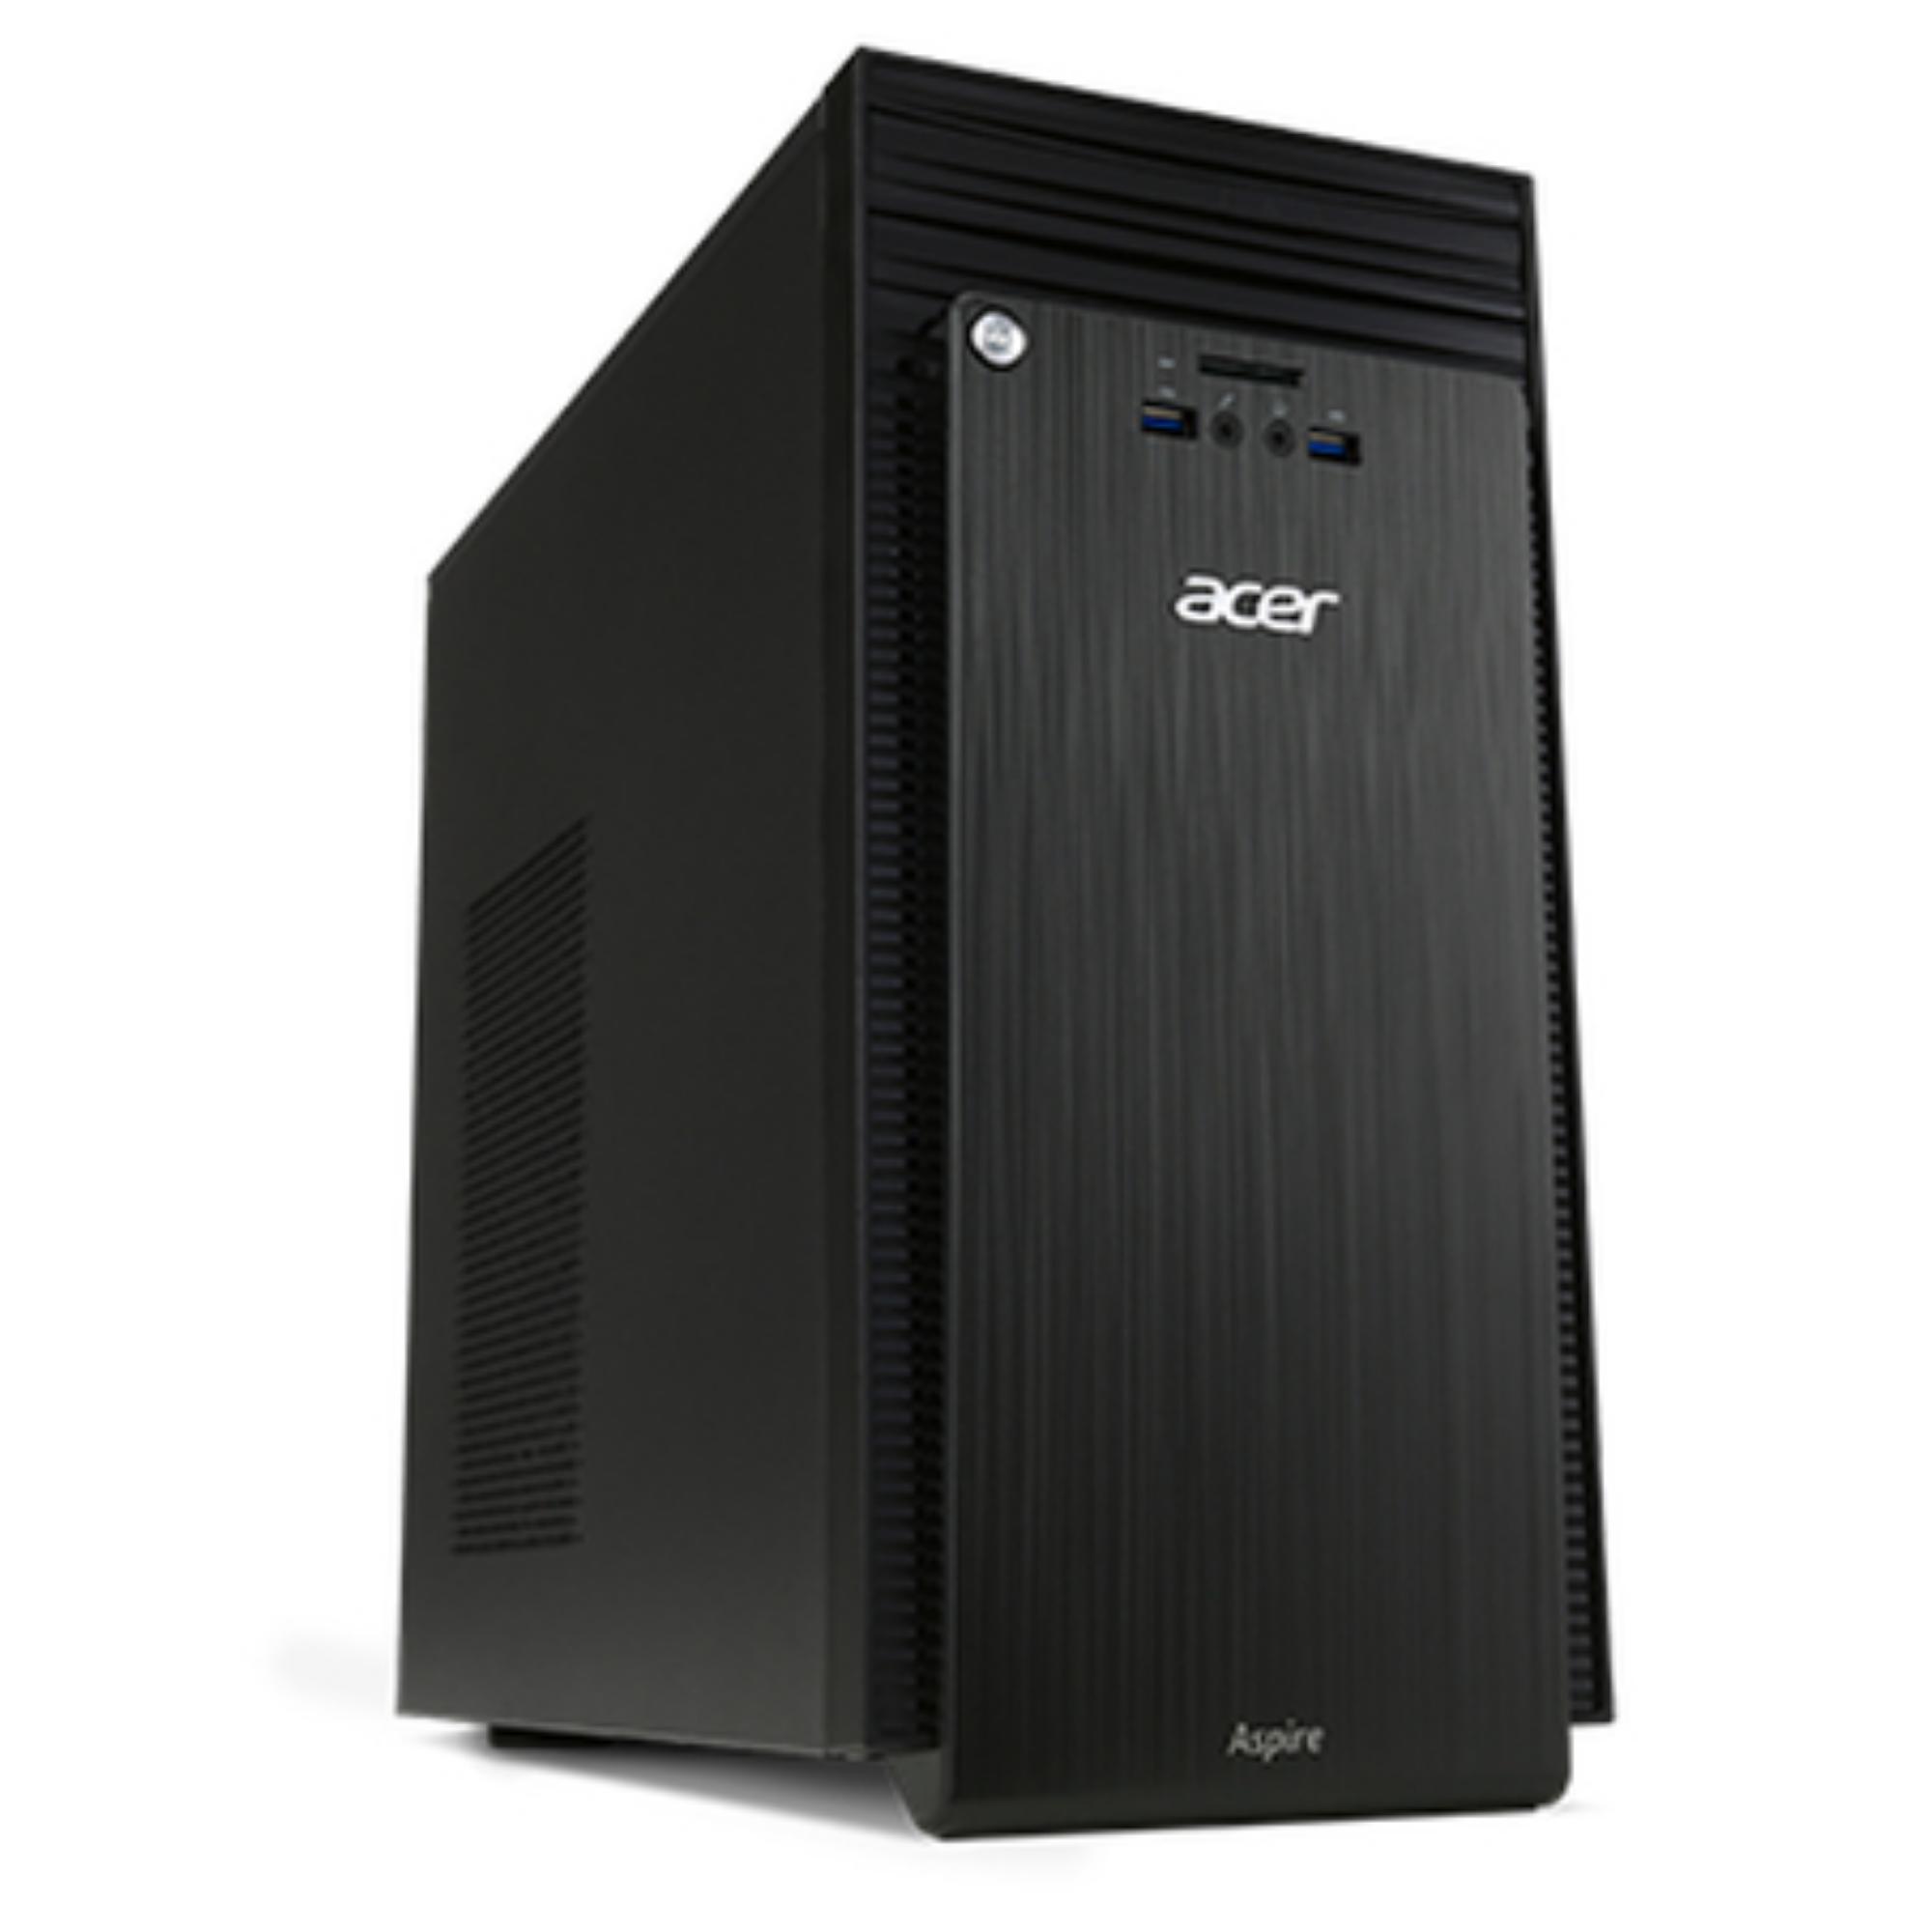 Tower – ACER ASPIRE TC-220 / AMD A10-7800 / 1TB HDD / 16GB / RADEON R7 / W10P – AATC220A10-B<br><br><span STYLE="background:#39ac37;"><font color="white"> DISPONIBILE </font></span>